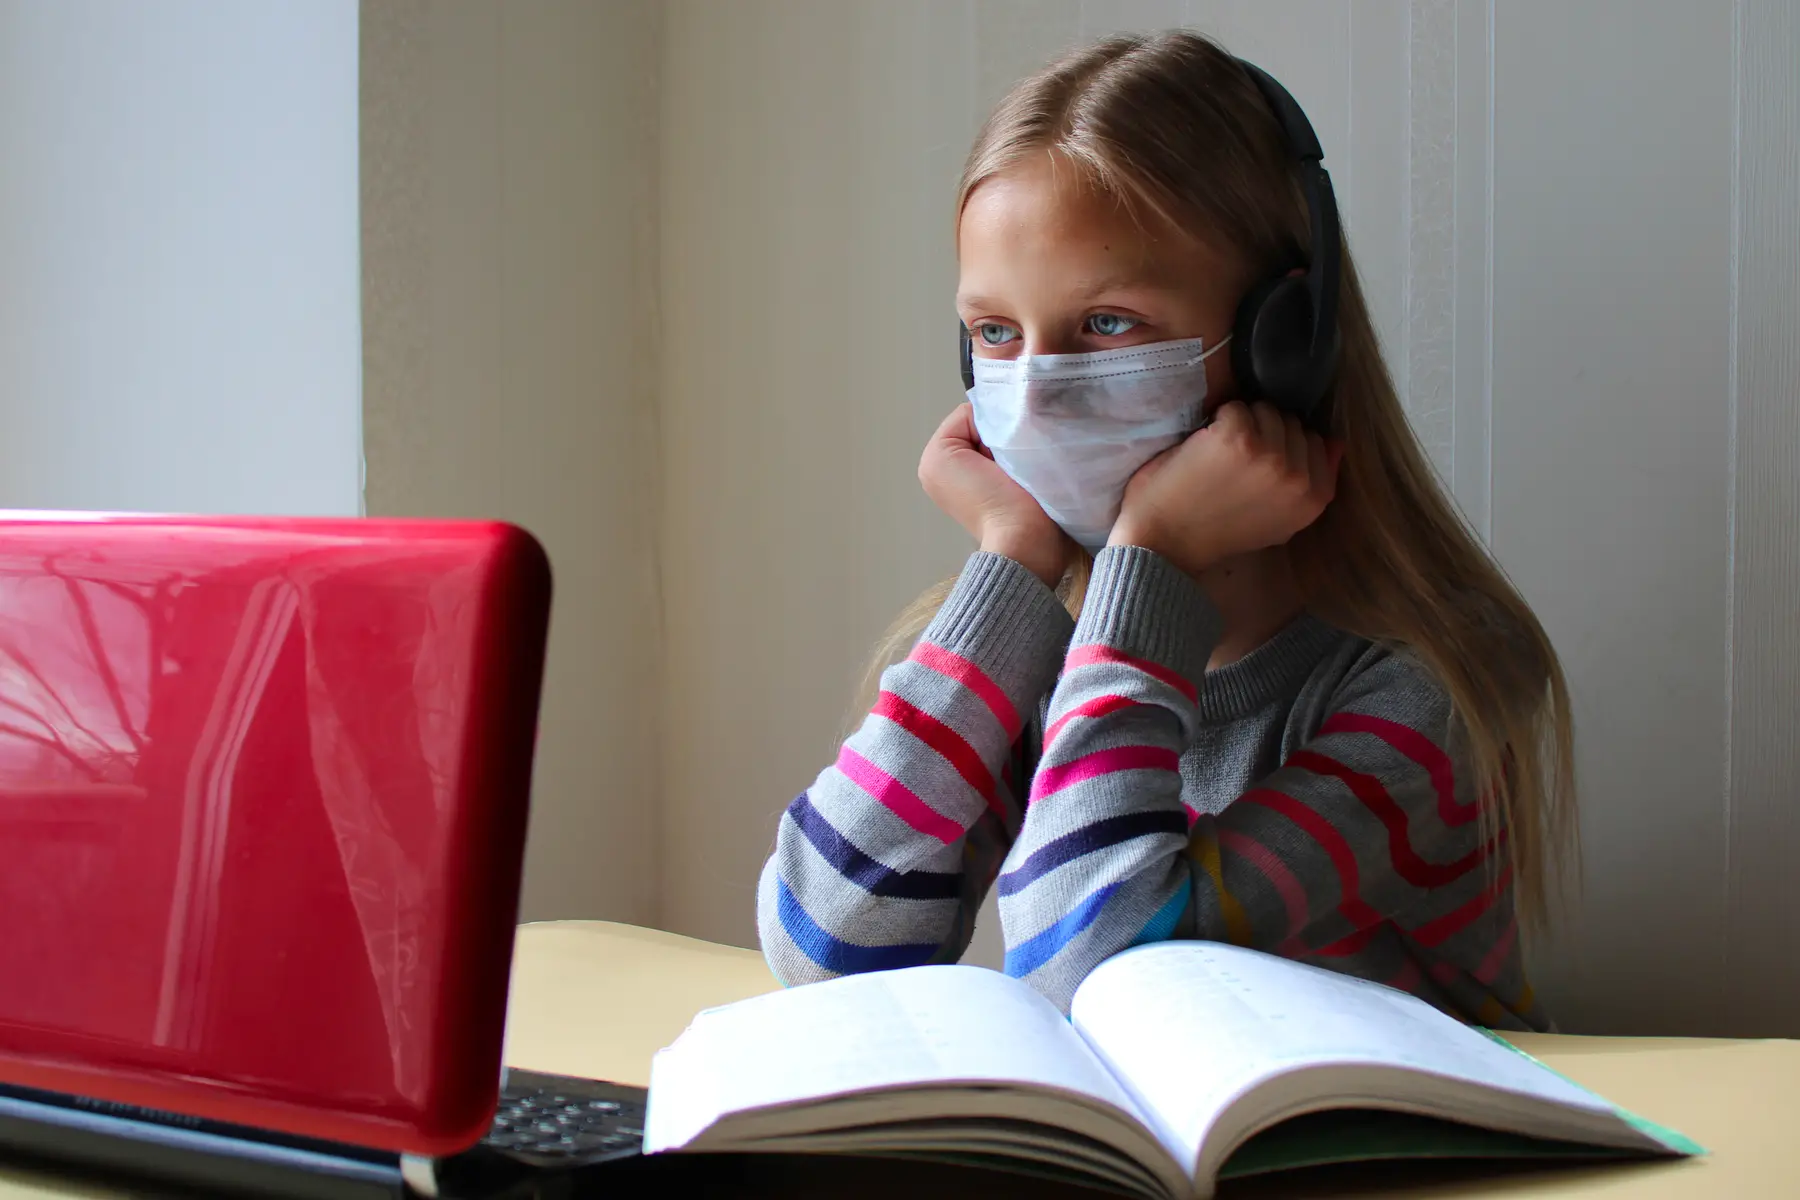 Child attending class online during the COVID-19 pandemic in Russia